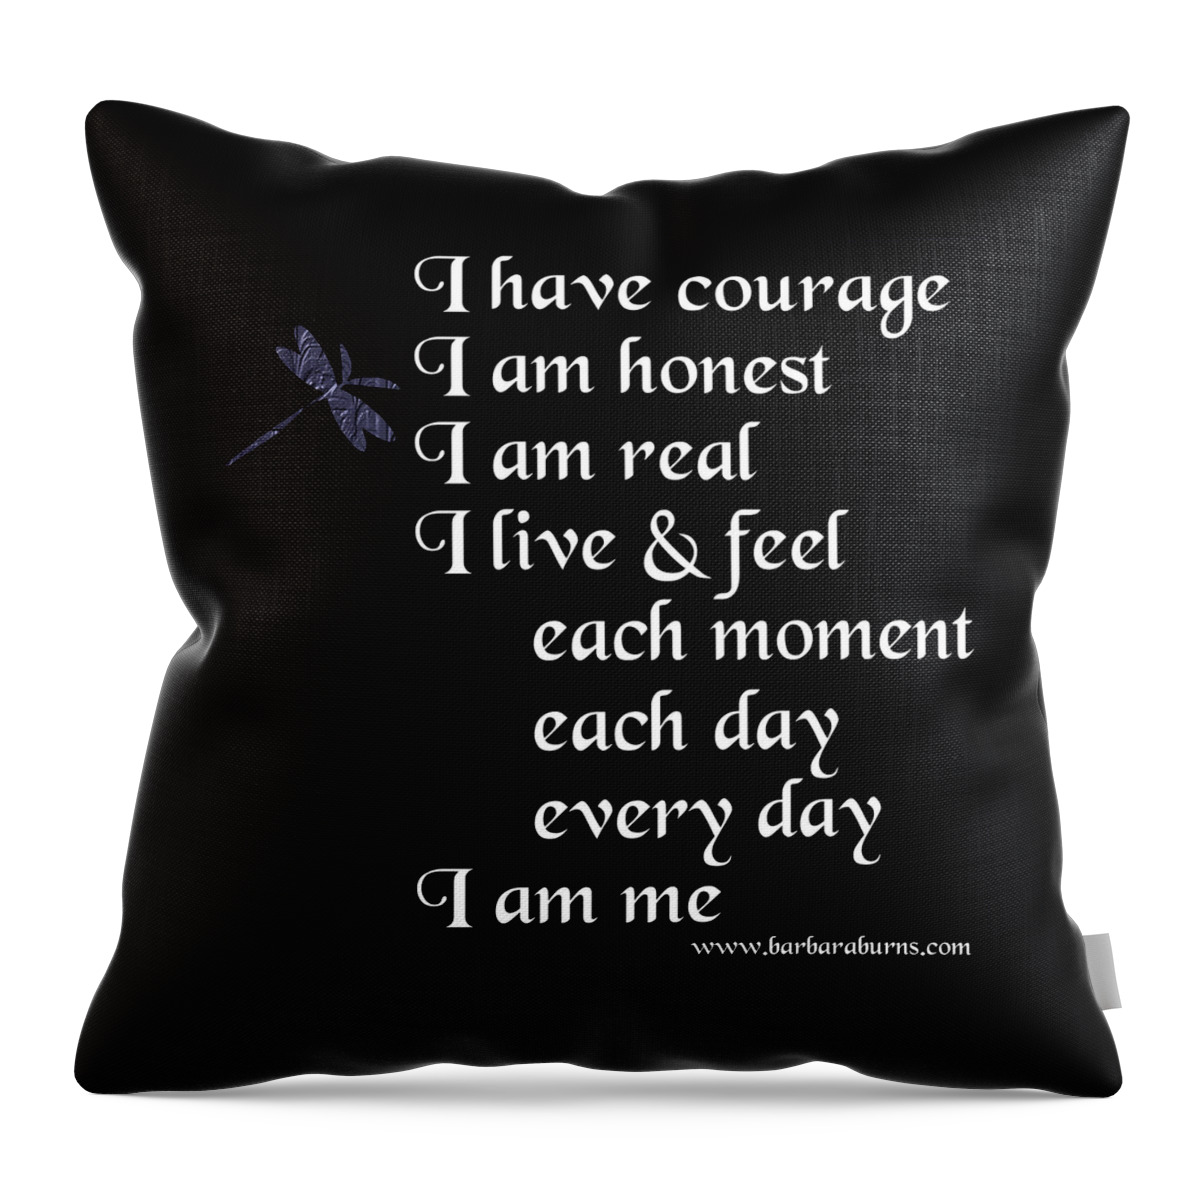 Courage Throw Pillow featuring the digital art Courage Honest Real by Barbara Burns